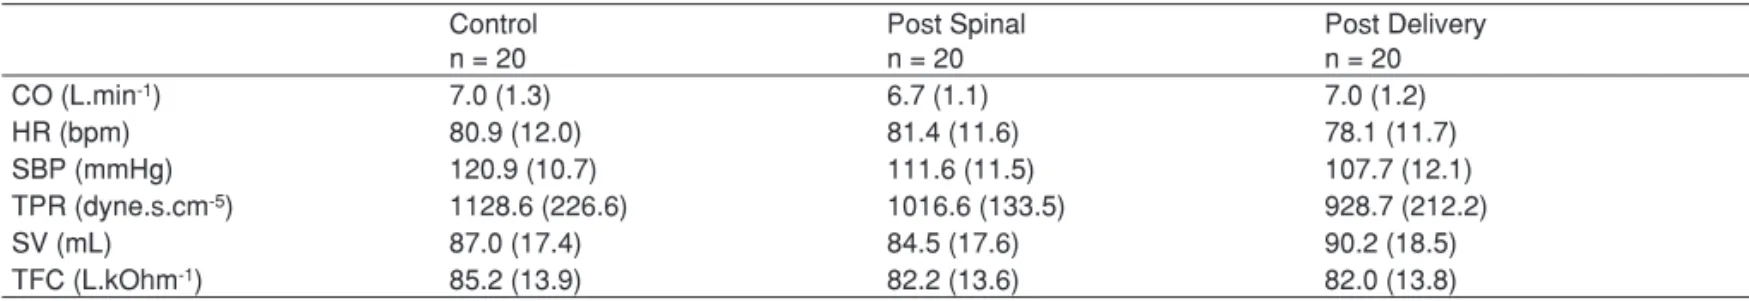 Table II - Maximum and Minimum Percent Changes in  Hemodynamic Variables during Postspinal and Postdelivery  Period  Post Spinal n = 20 Post Deliveryn = 20 CO (L.min -1 )   Maximum % 111.0 (11.0) 113.6 (16.5)   Minimum % 84.6 (13.0) 87.6 (13.6) HR (bpm)   